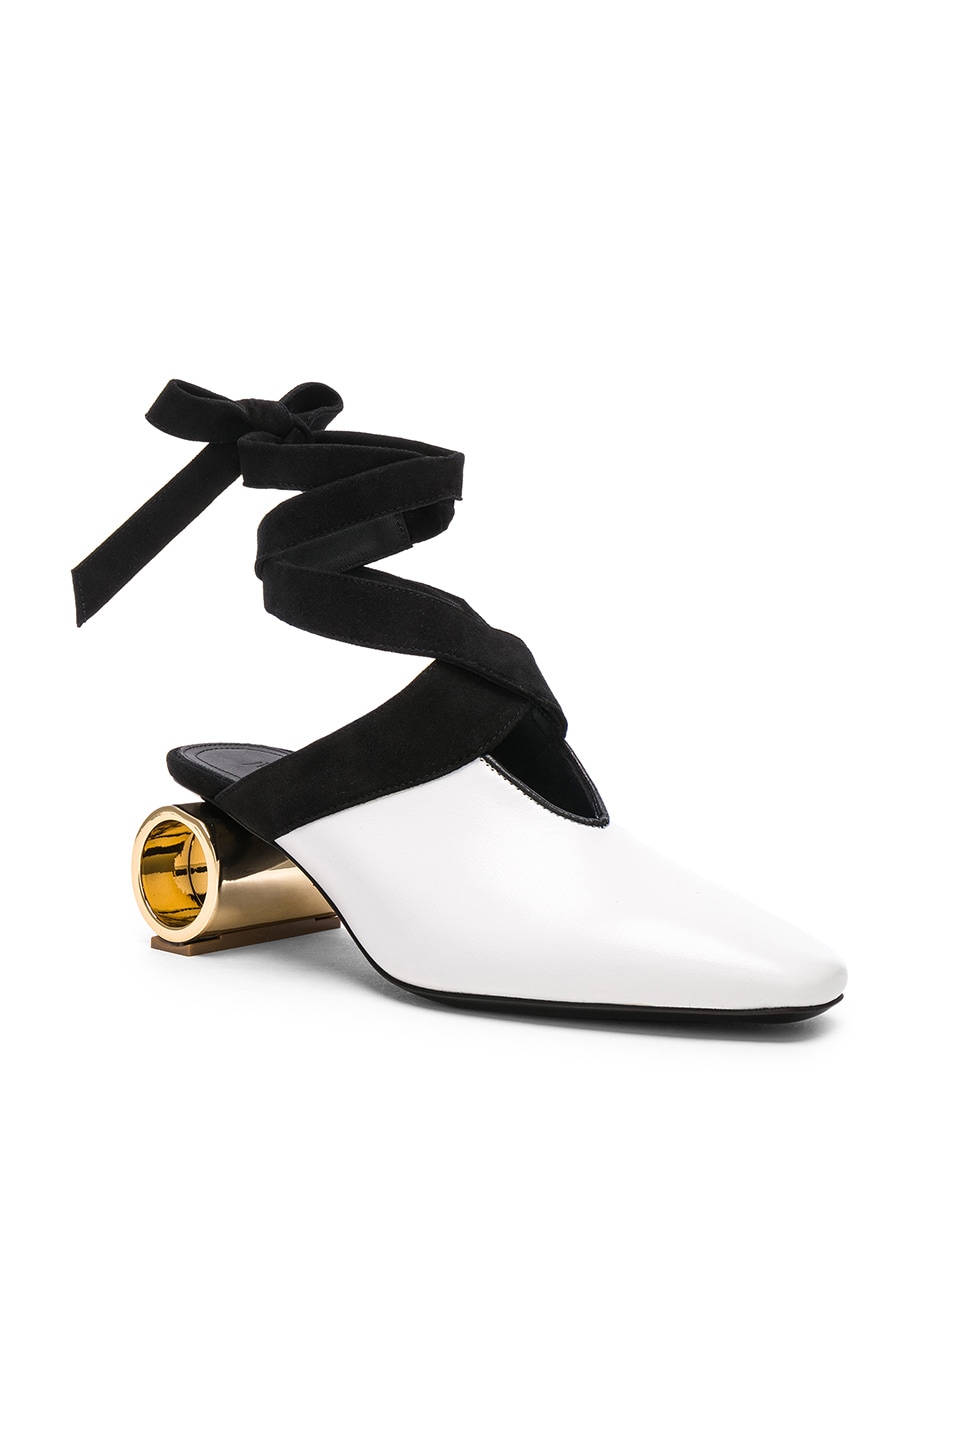 JW Anderson Cylinder Heel Leather Ballet Shoes in White | FWRD